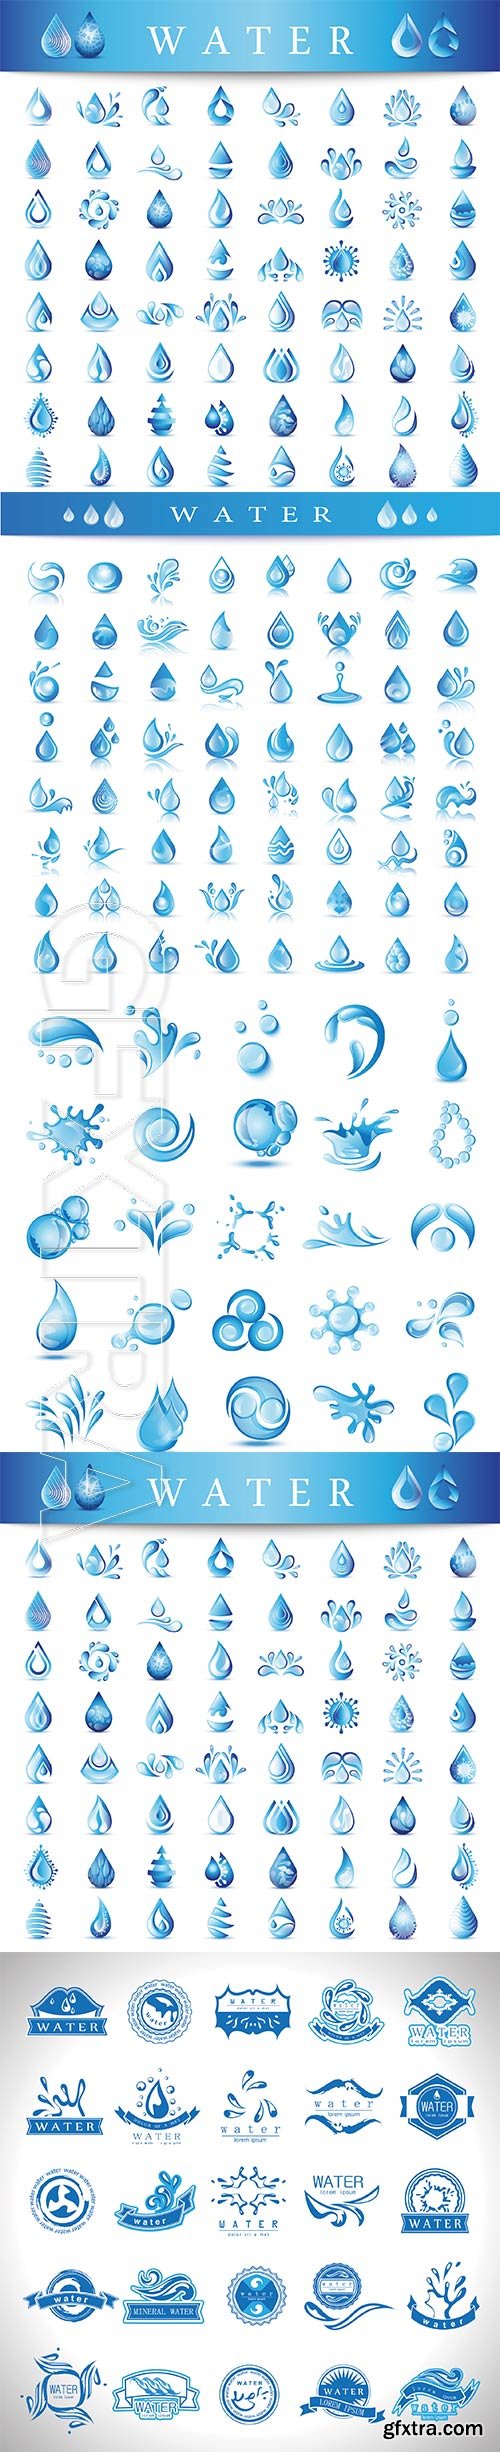 Water drop icons set isolated on white background